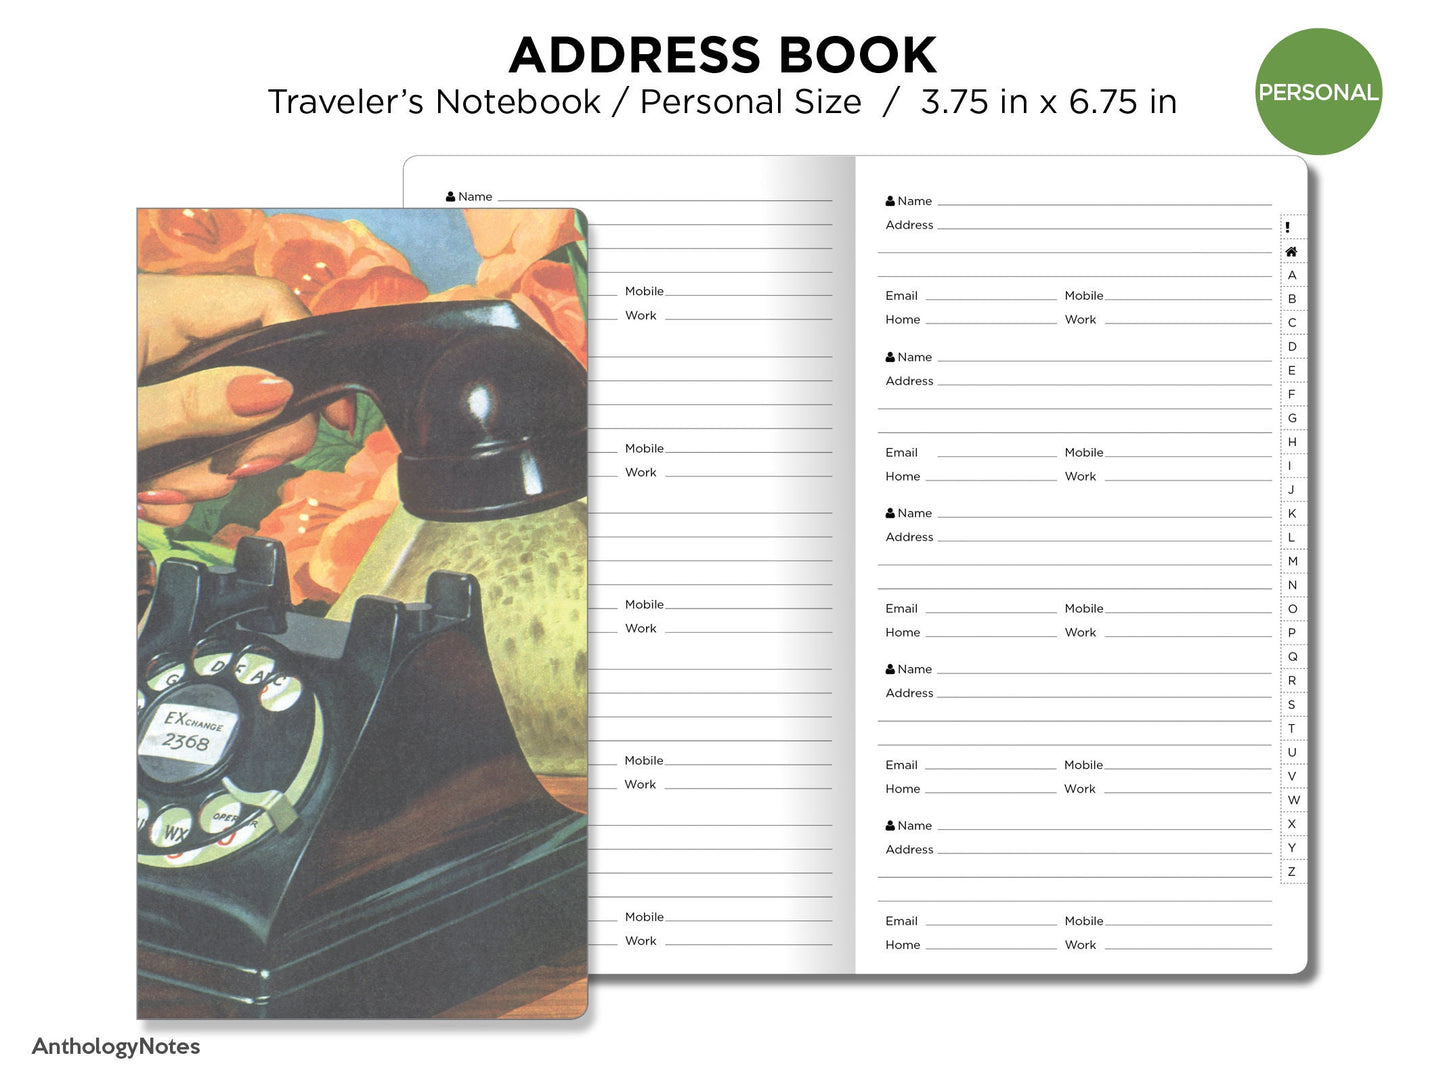 TN Personal ADDRESS Book Traveler's Notebook Printable Insert Contacts with Index